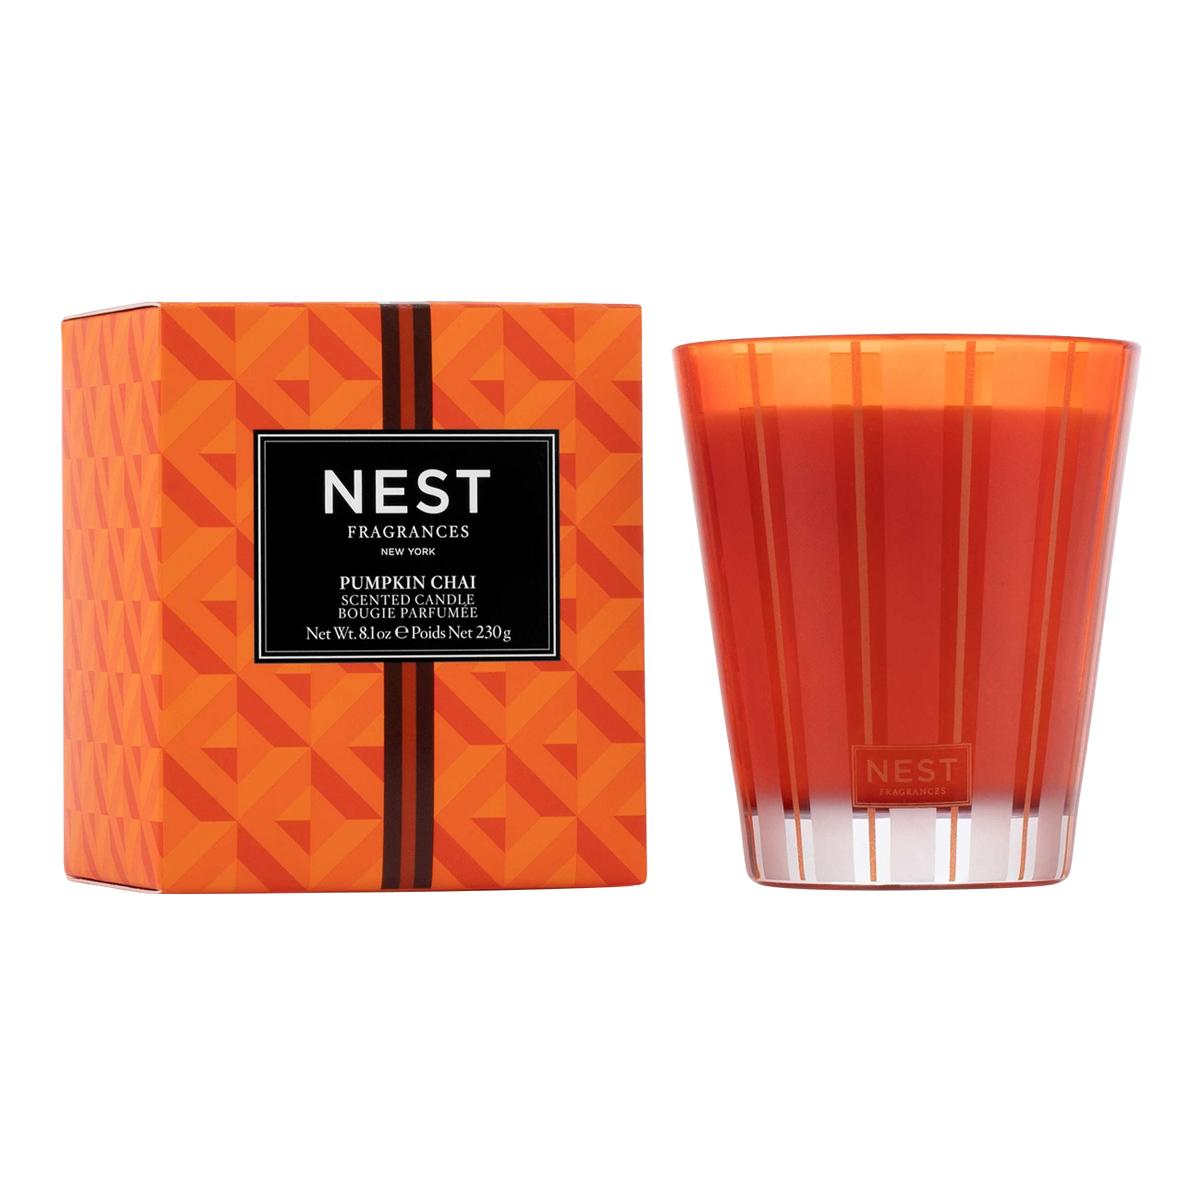 Primary image of Pumpkin Chai Candle